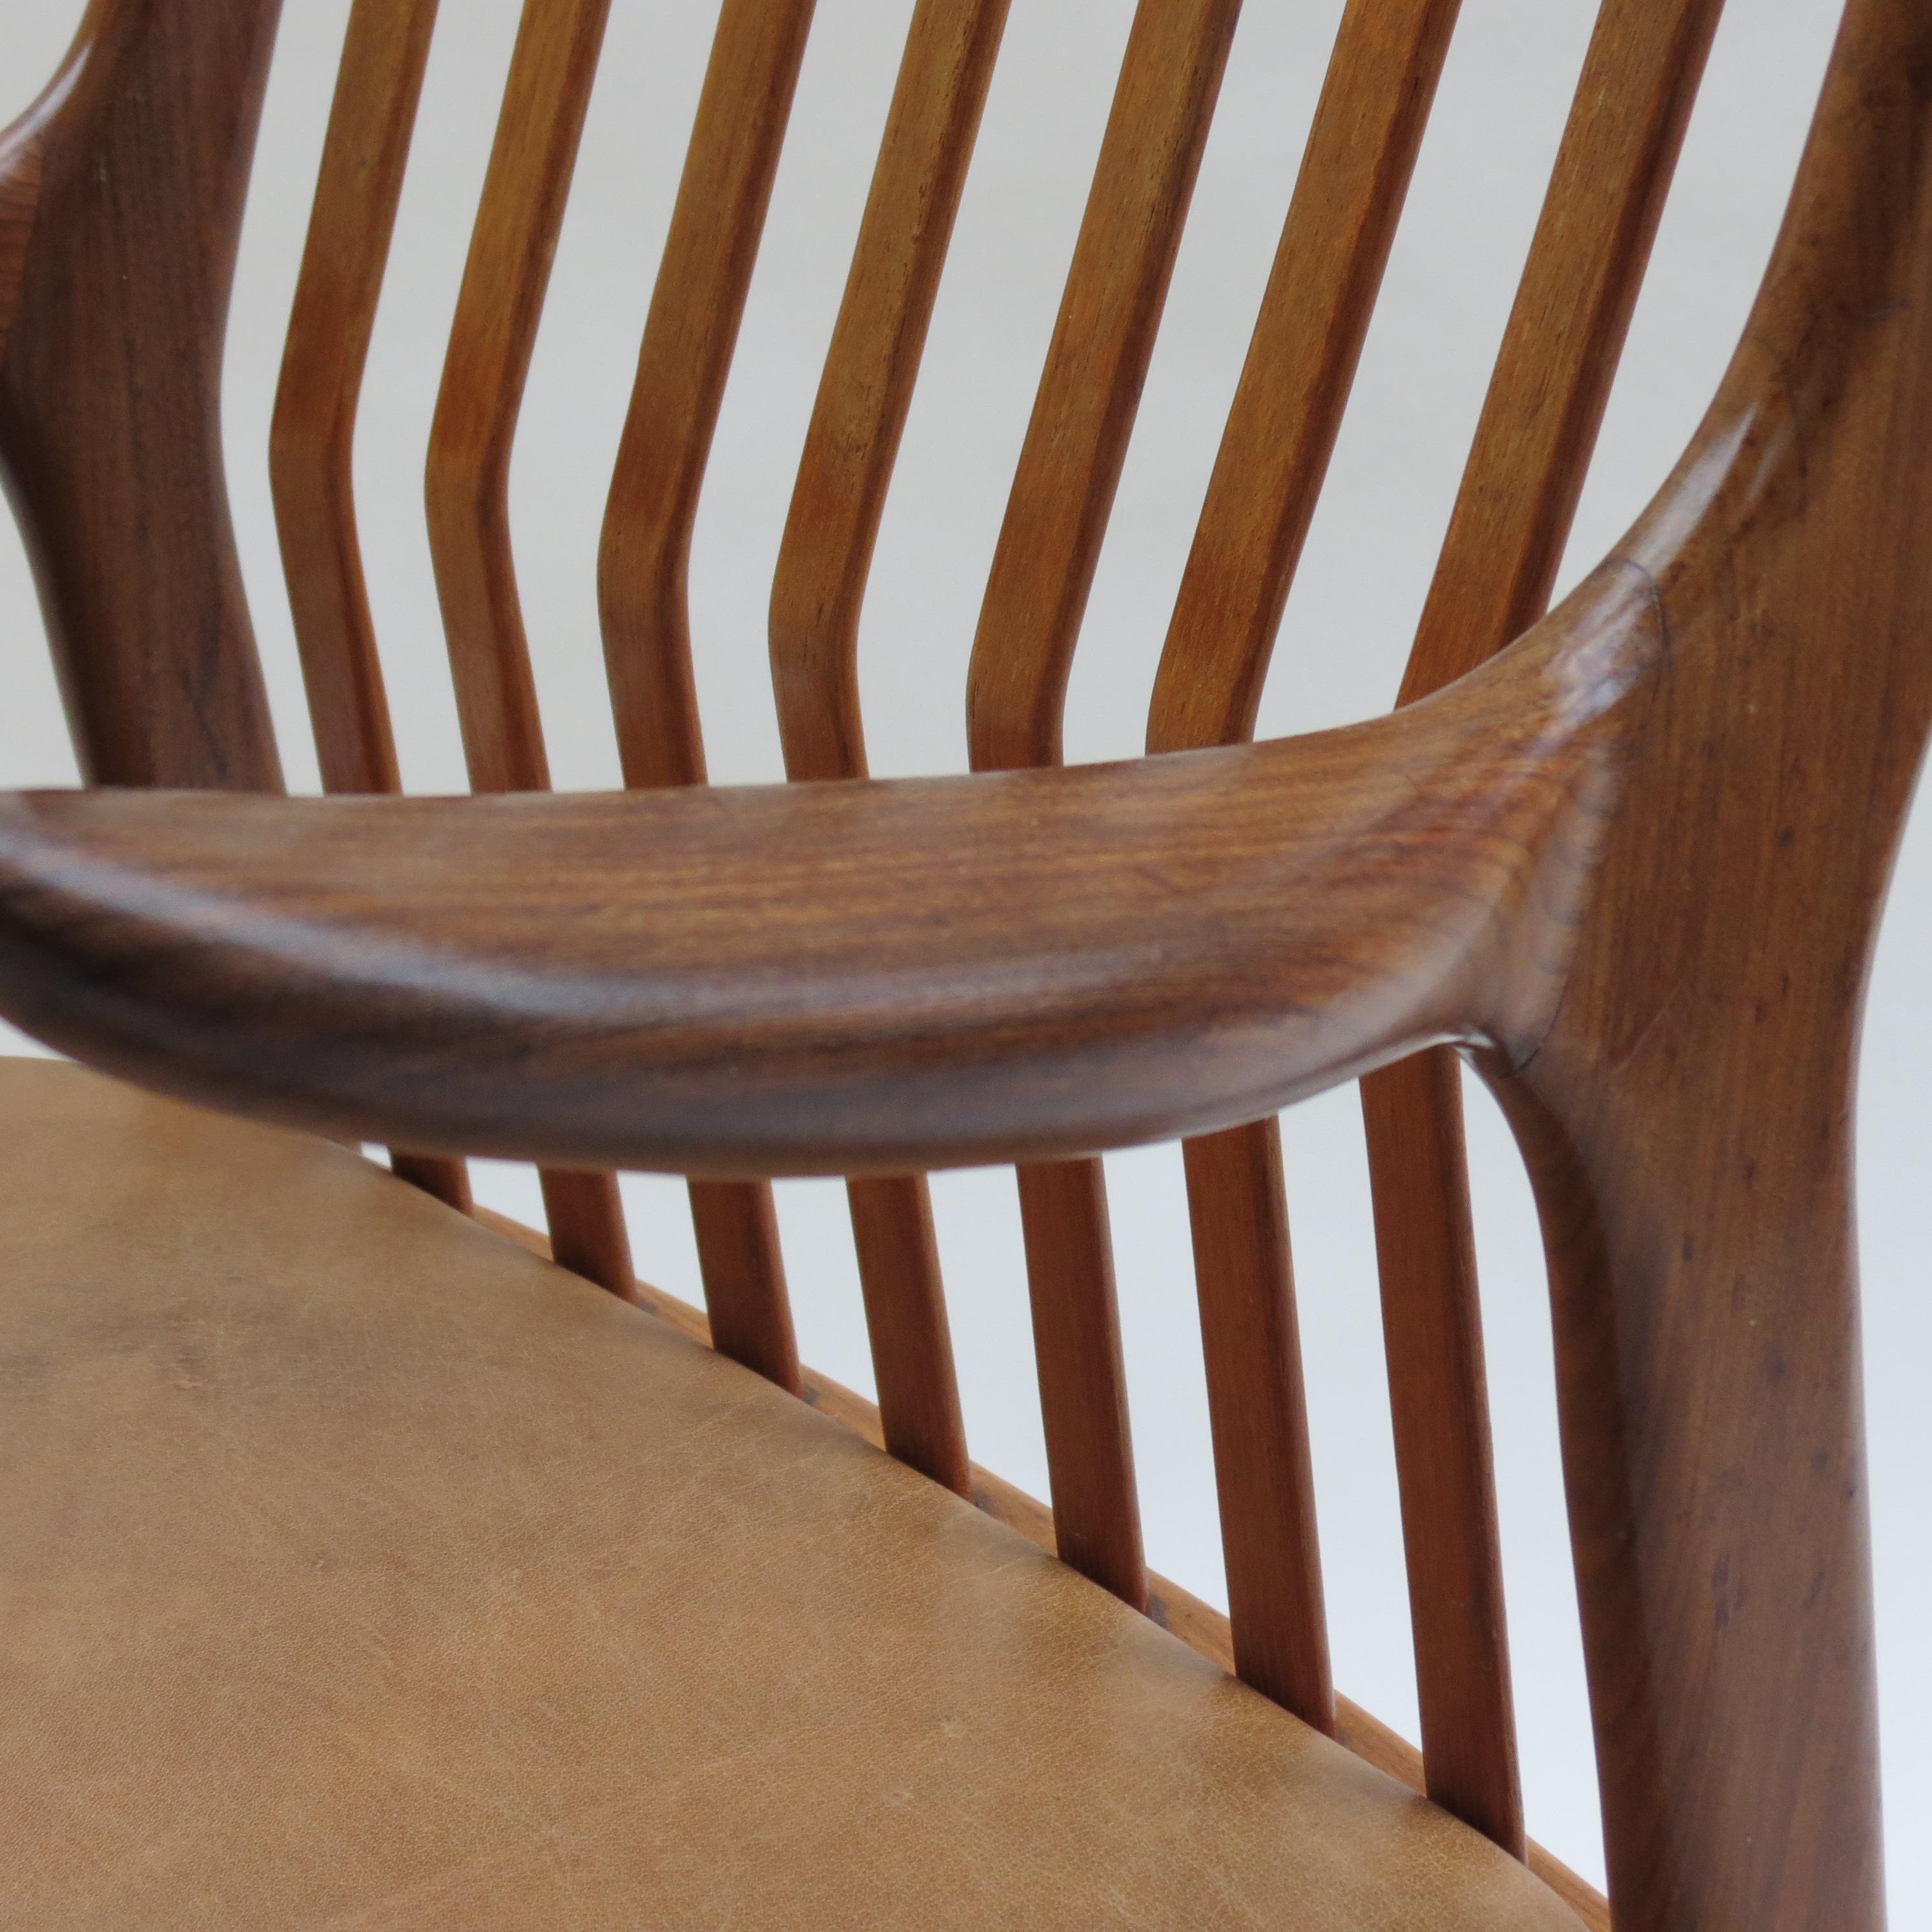 Midcentury Danish Chair by Svend Madsen 1960s with Brown Leather Seat 1